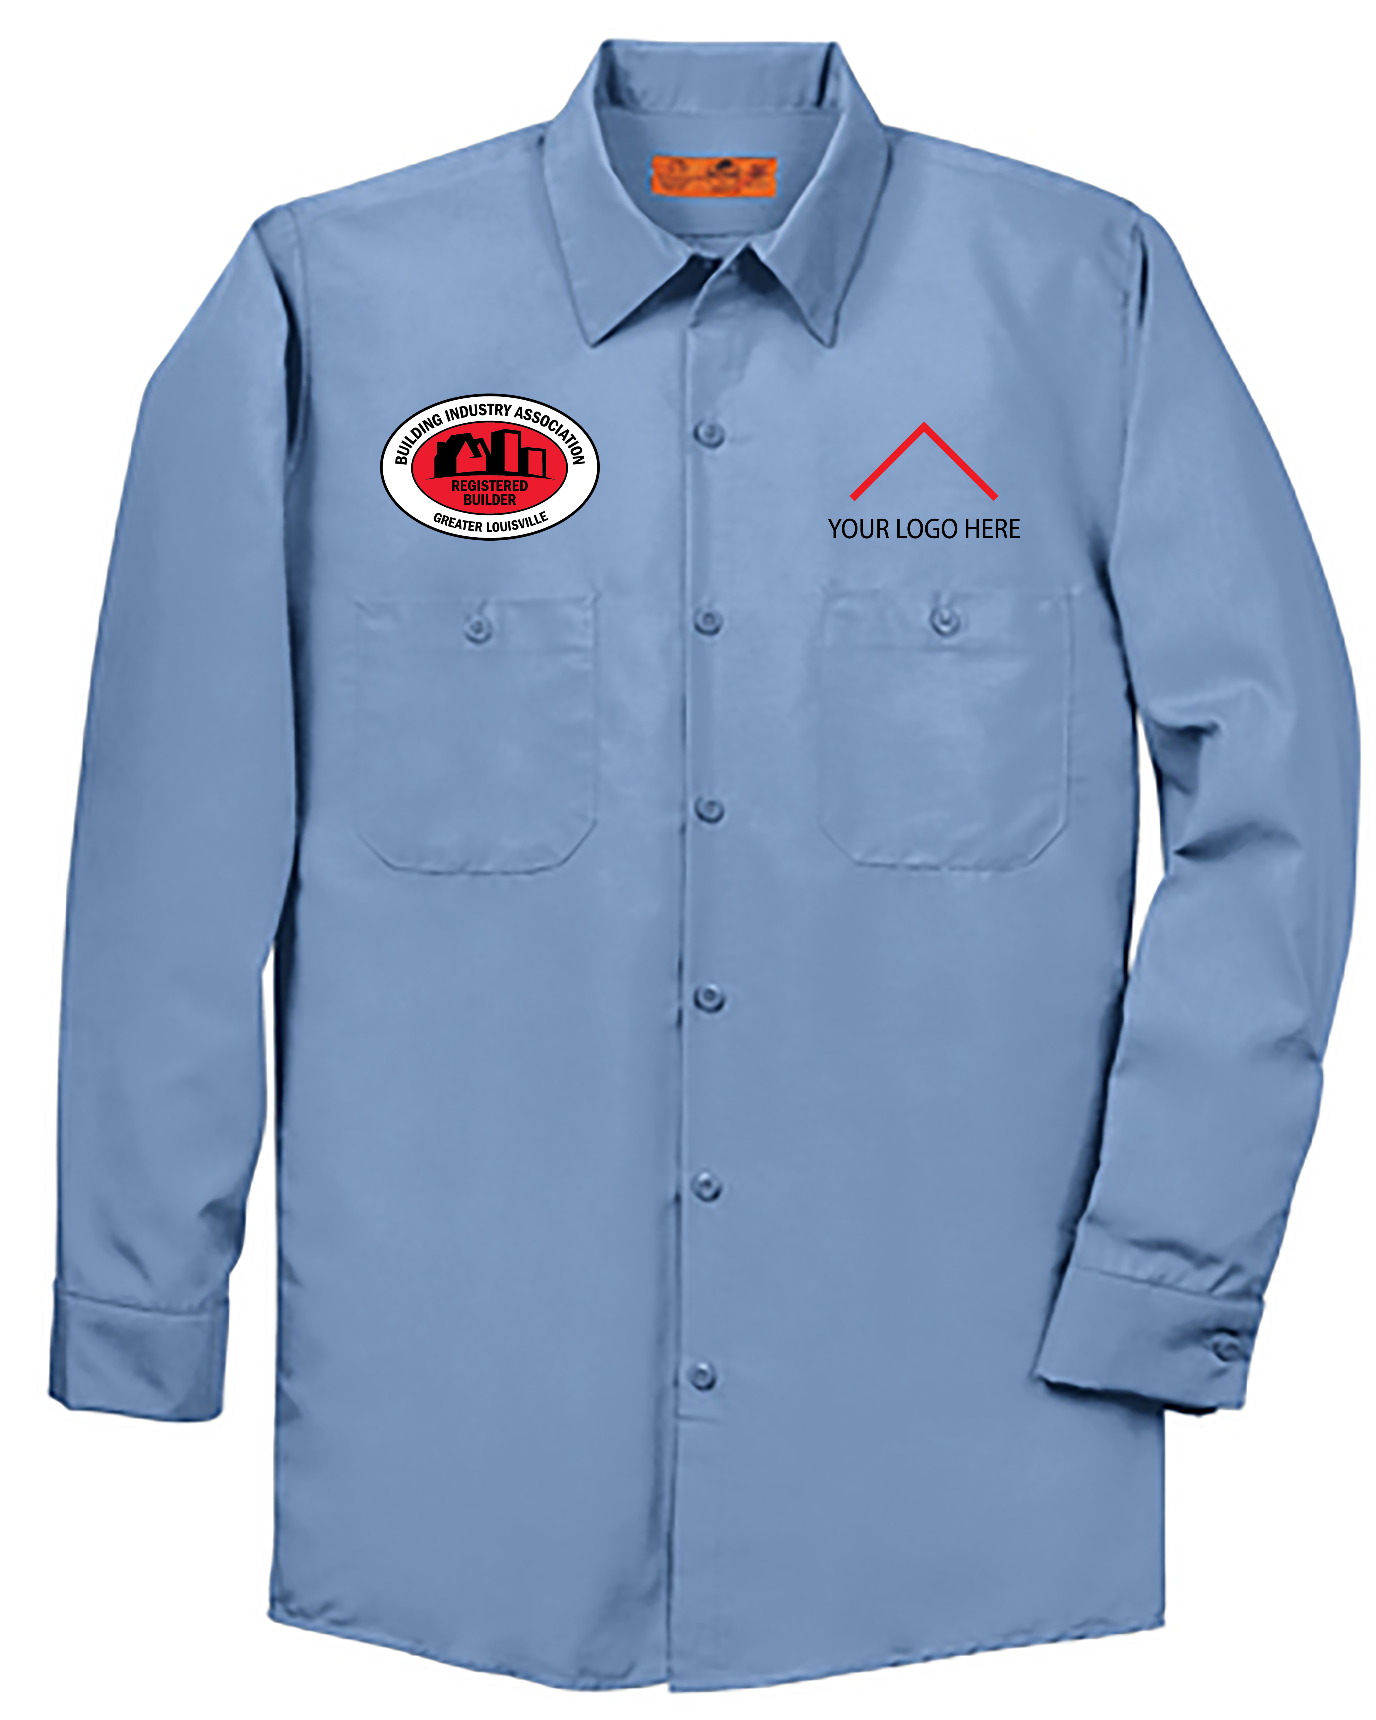 Registered Builder - Red Kap® Long Size, Long Sleeve Industrial Work Shirt - SP14LONG (Add Your Own)